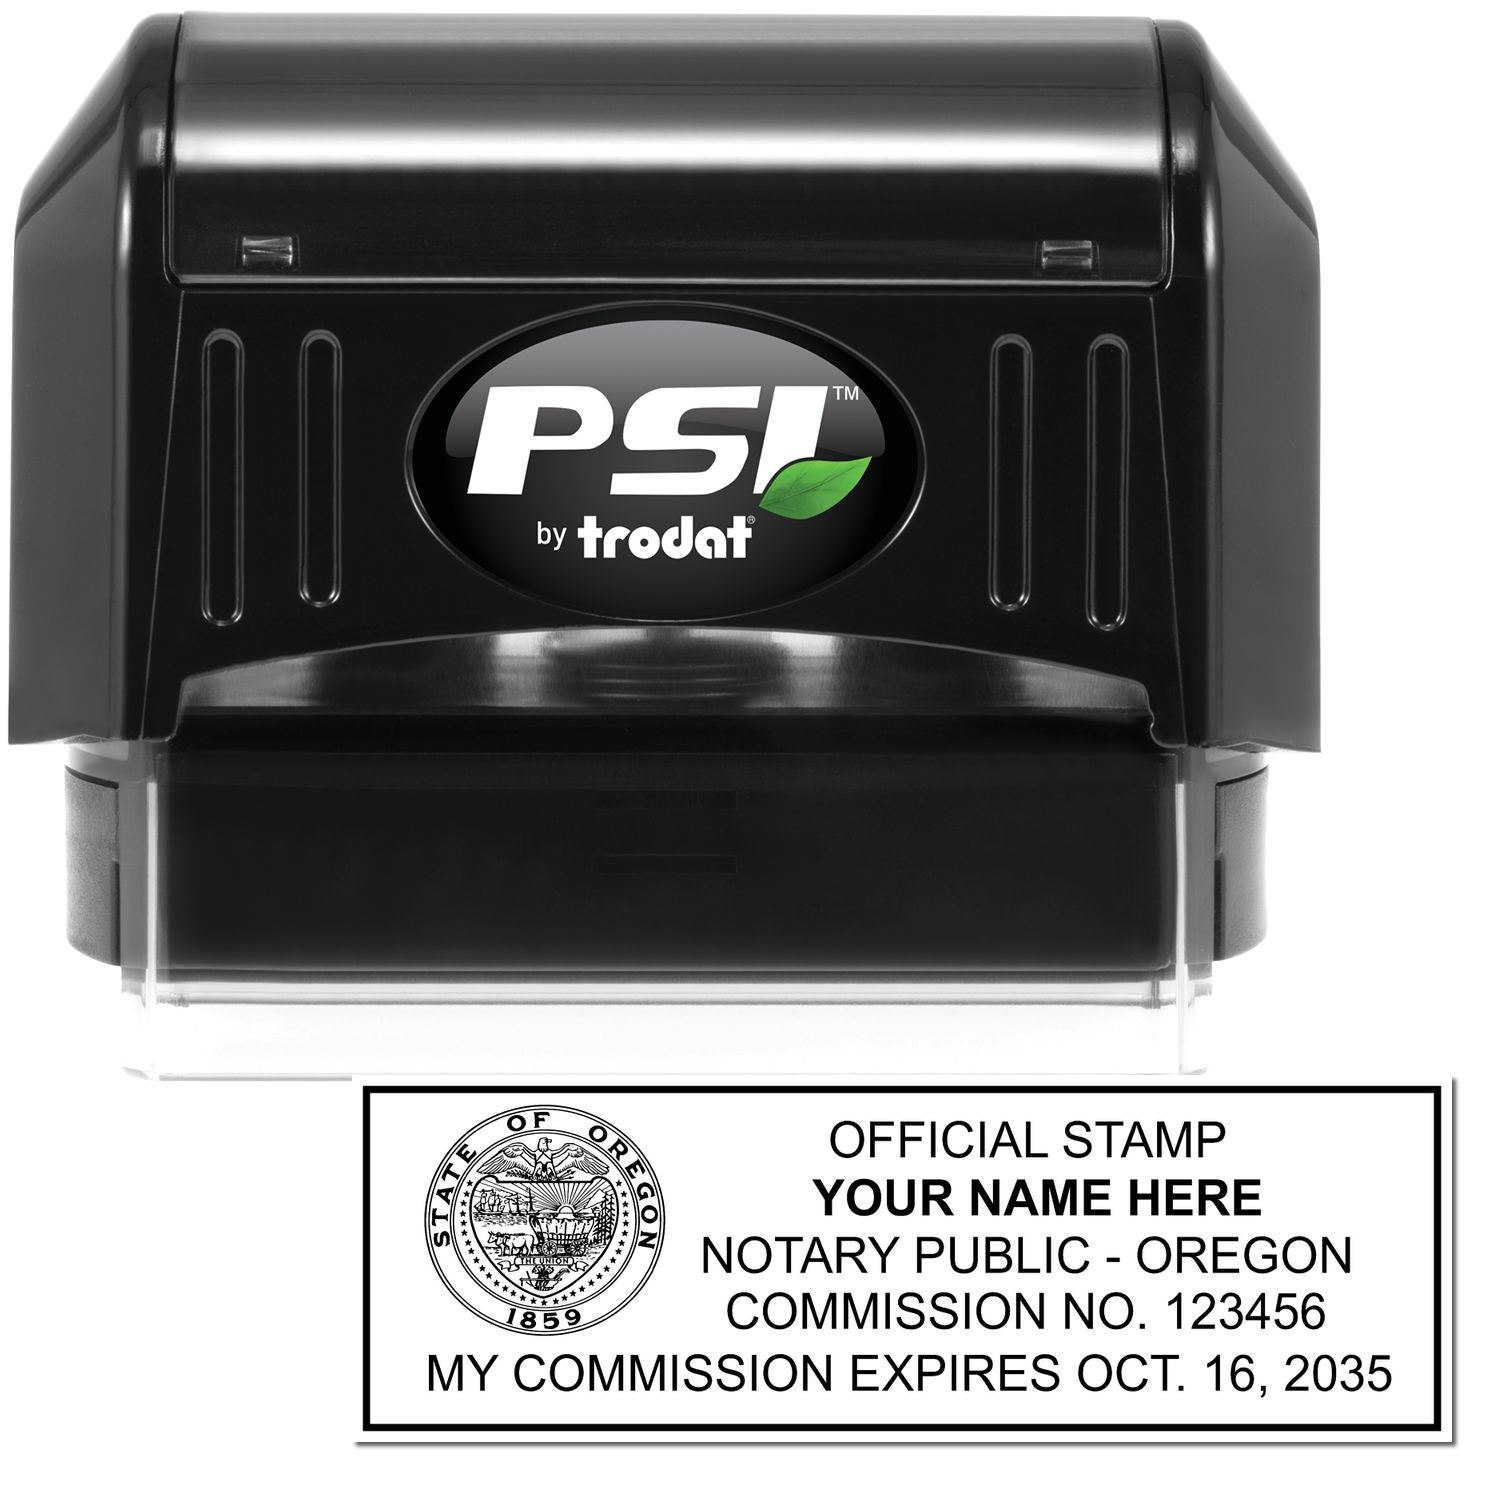 The main image for the PSI Oregon Notary Stamp depicting a sample of the imprint and electronic files